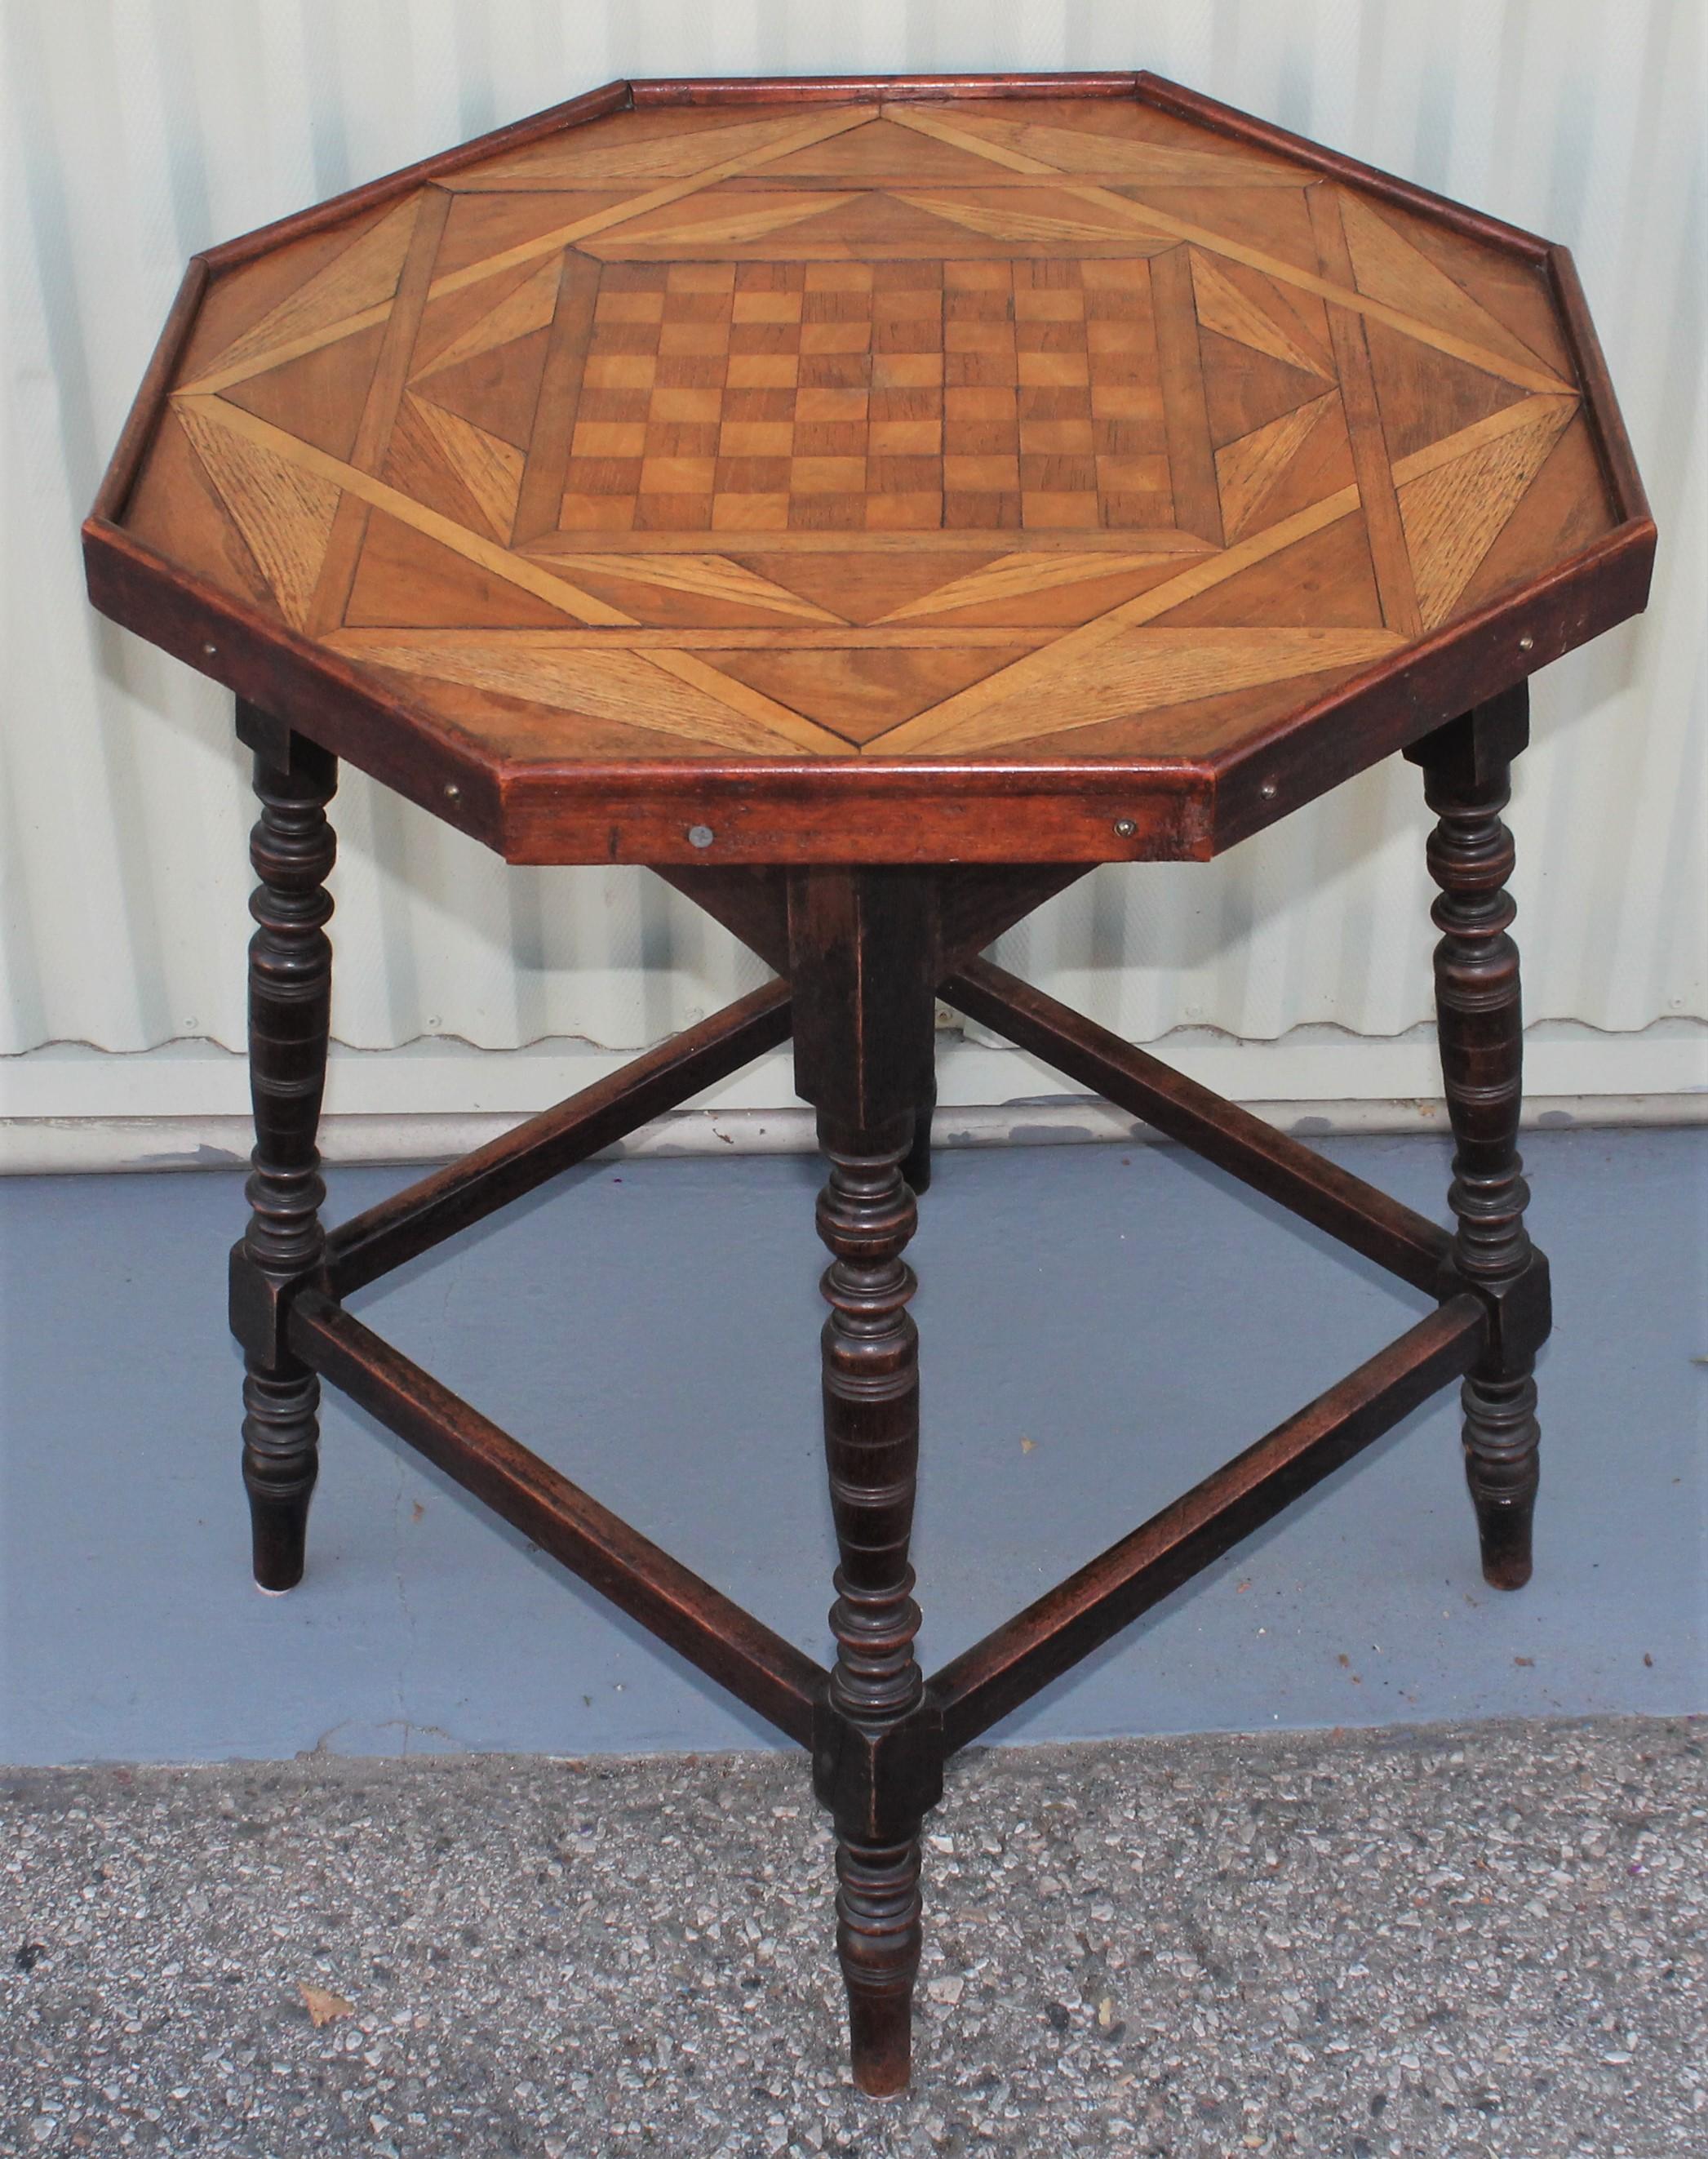 This 19th century side table or gaming table has an inlaid checker board top. Fantastic turned legs and Fine sturdy condition. Fantastic form.